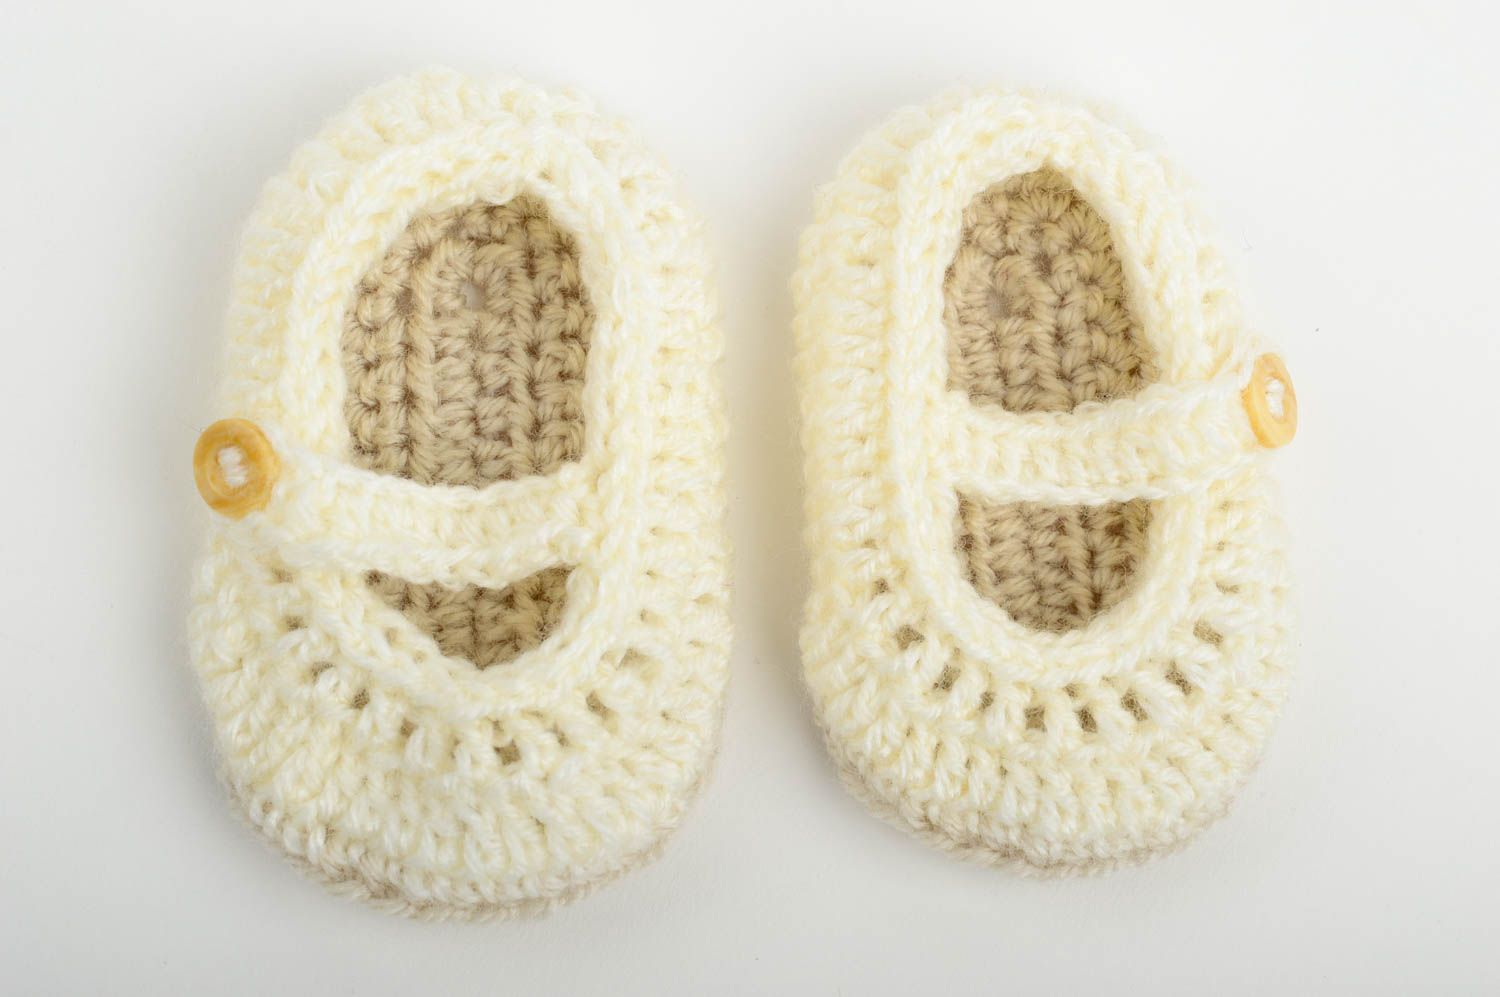 Handmade baby shoes goods for toddlers baby socks toddler shoes kids gifts photo 3